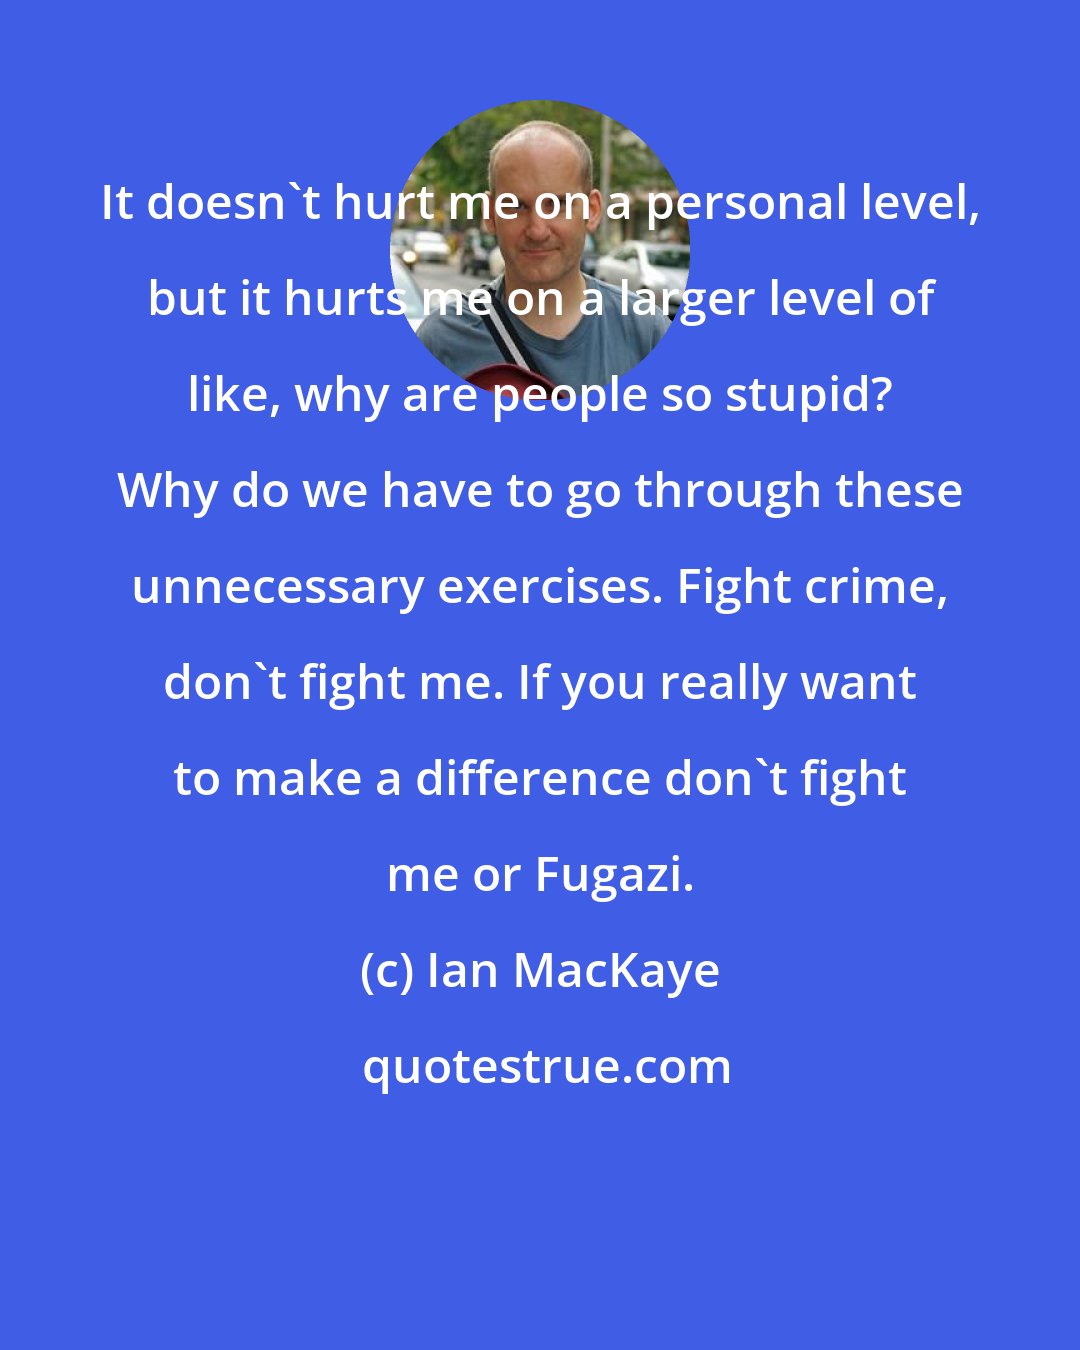 Ian MacKaye: It doesn't hurt me on a personal level, but it hurts me on a larger level of like, why are people so stupid? Why do we have to go through these unnecessary exercises. Fight crime, don't fight me. If you really want to make a difference don't fight me or Fugazi.